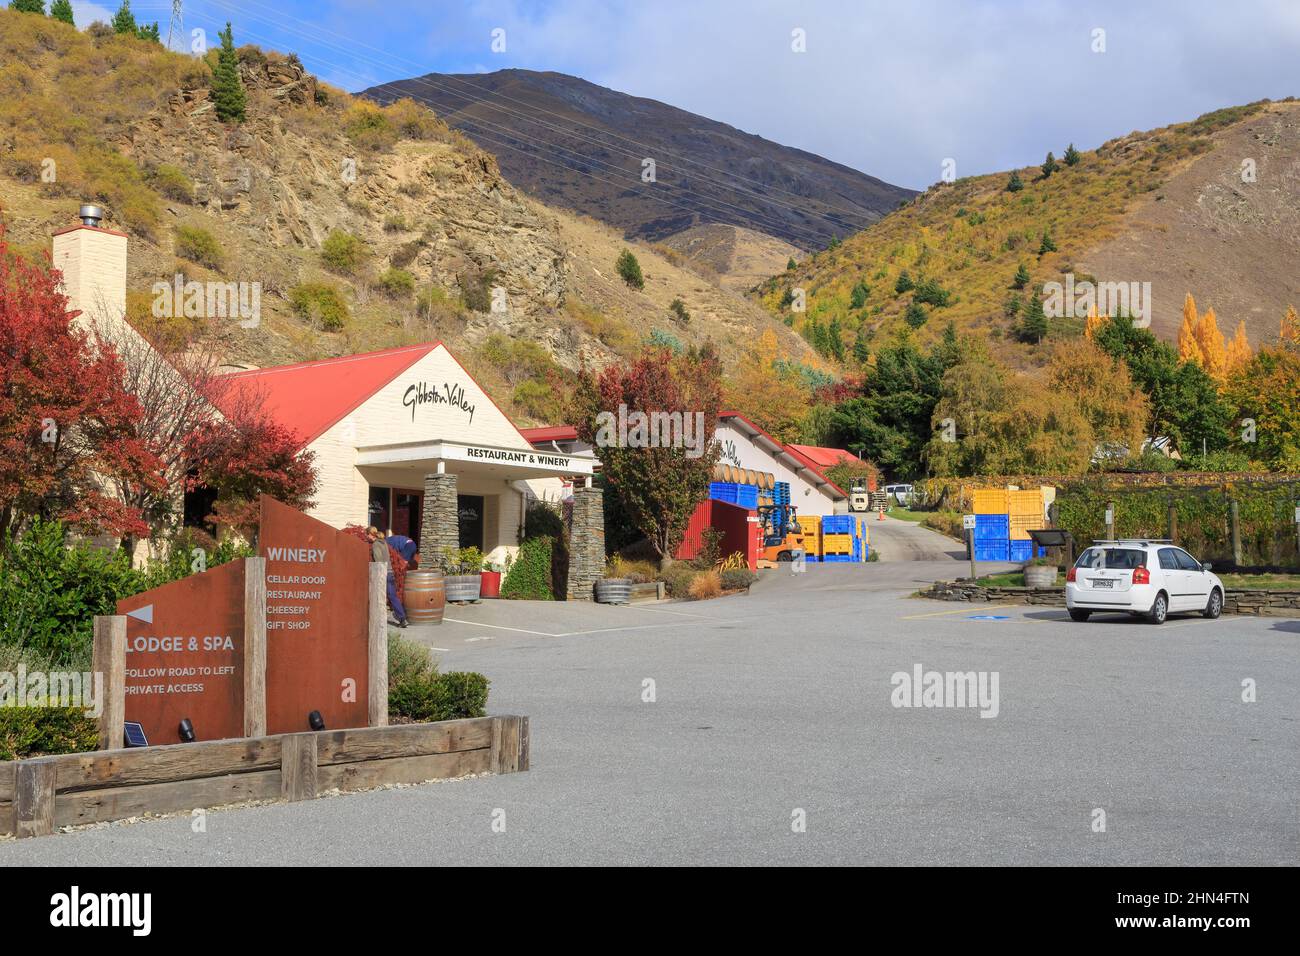 The Gibbston Valley Restaurant and Winery in the Otago Region, New Zealand Stock Photo